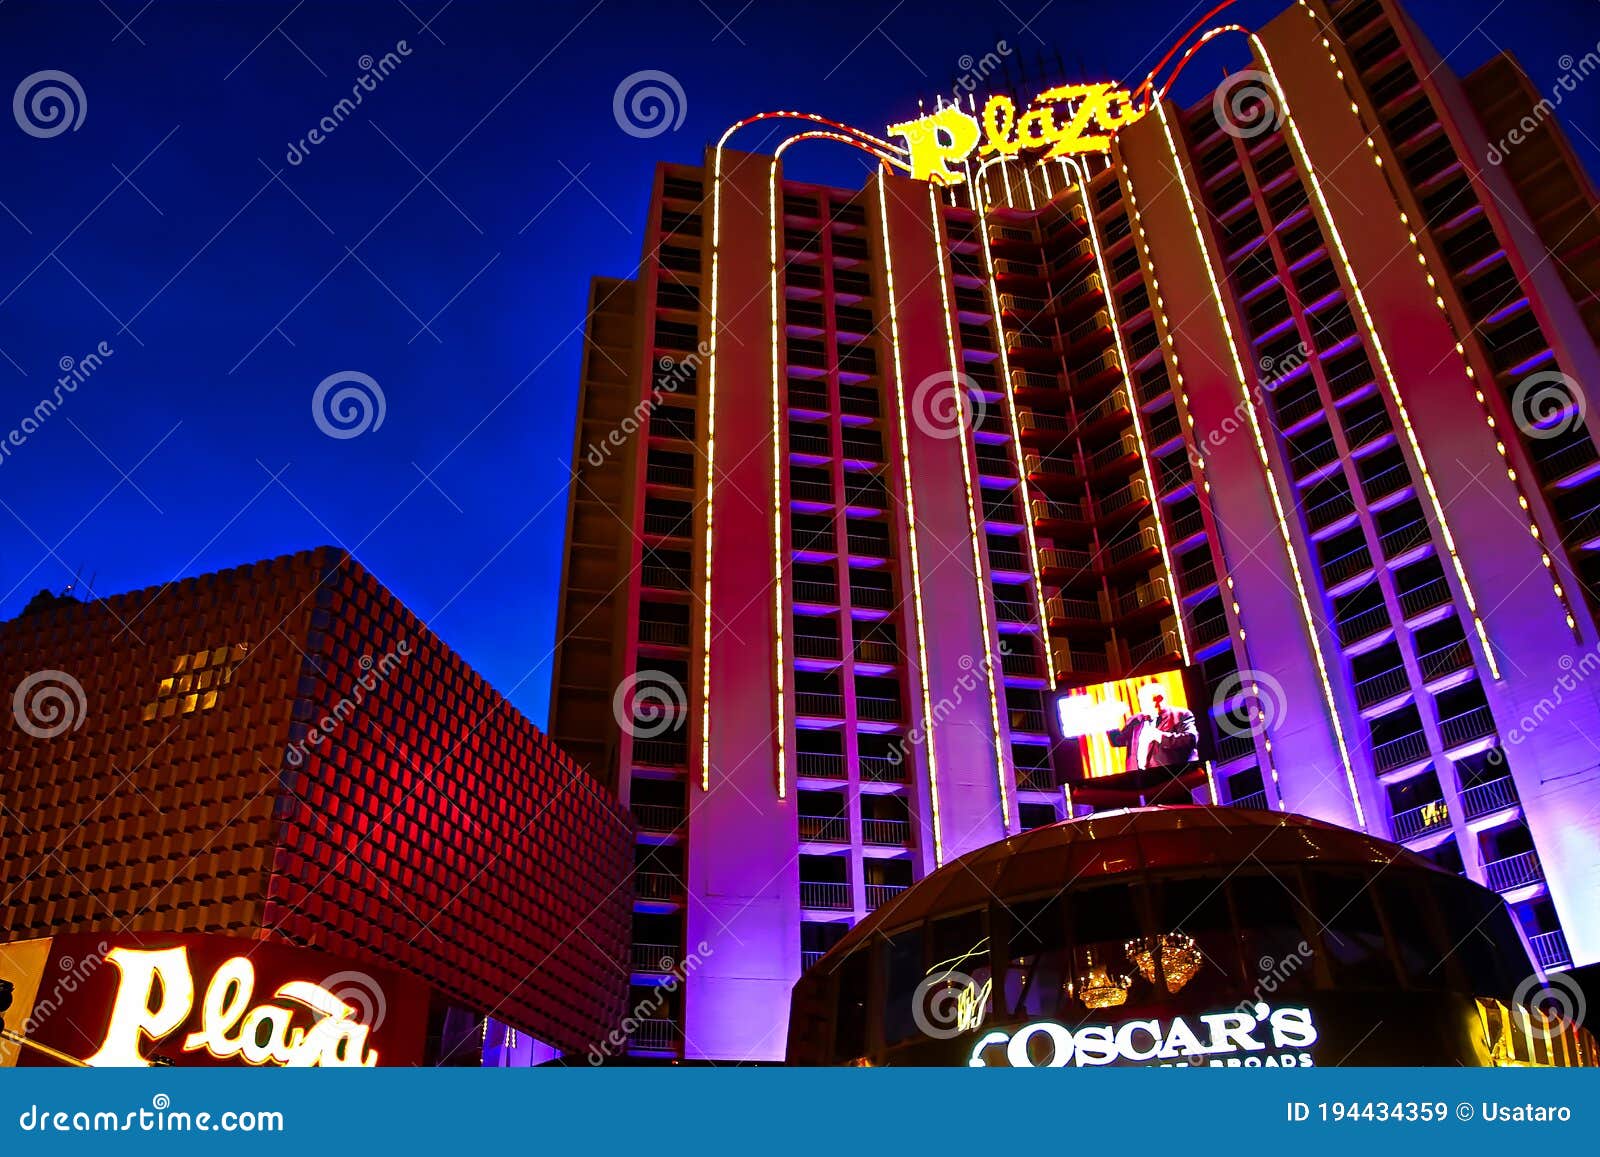 fremont street experience hotels